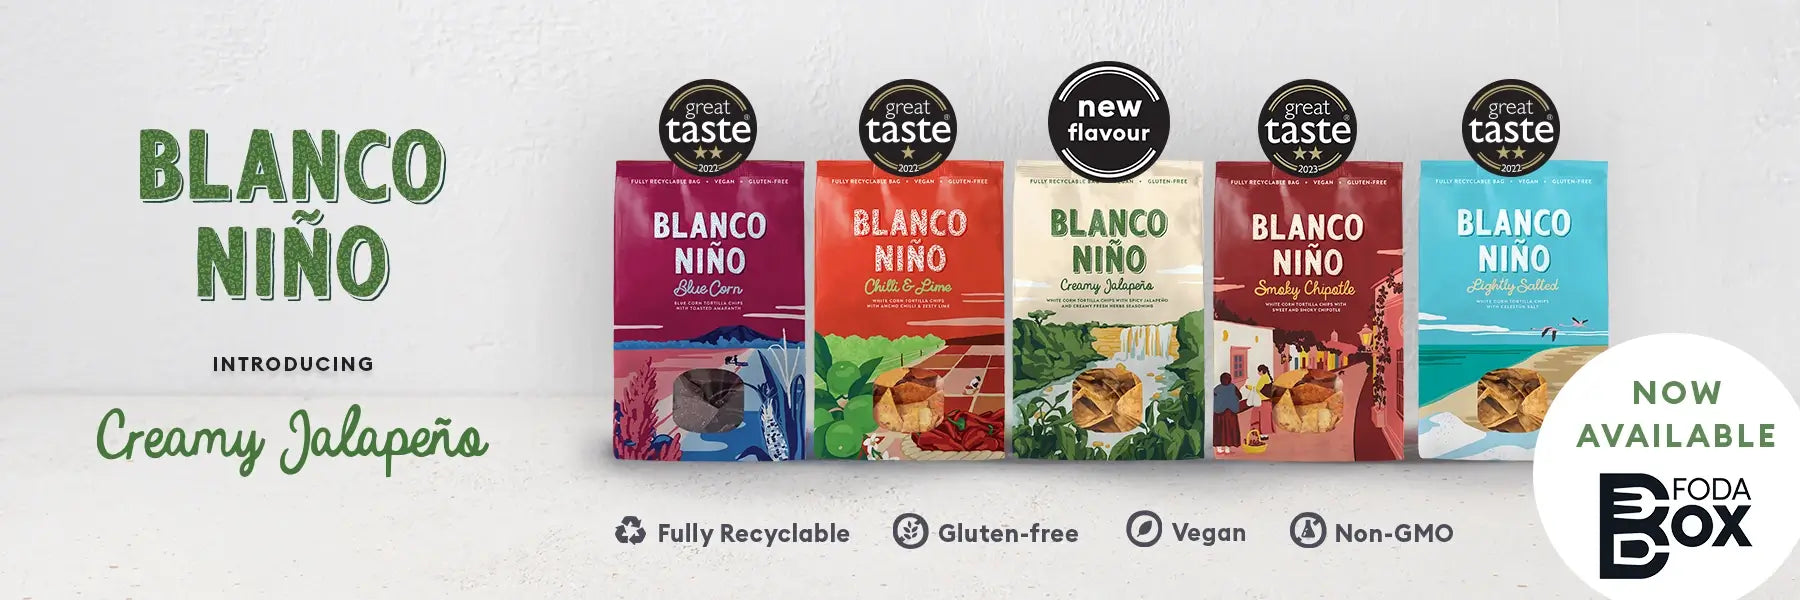 Blanco Nino All 5 Flavours Lightly Salted, Chilli & Lime, Smoky Chipotle, Blue Corn and Creamy Jalapeno.